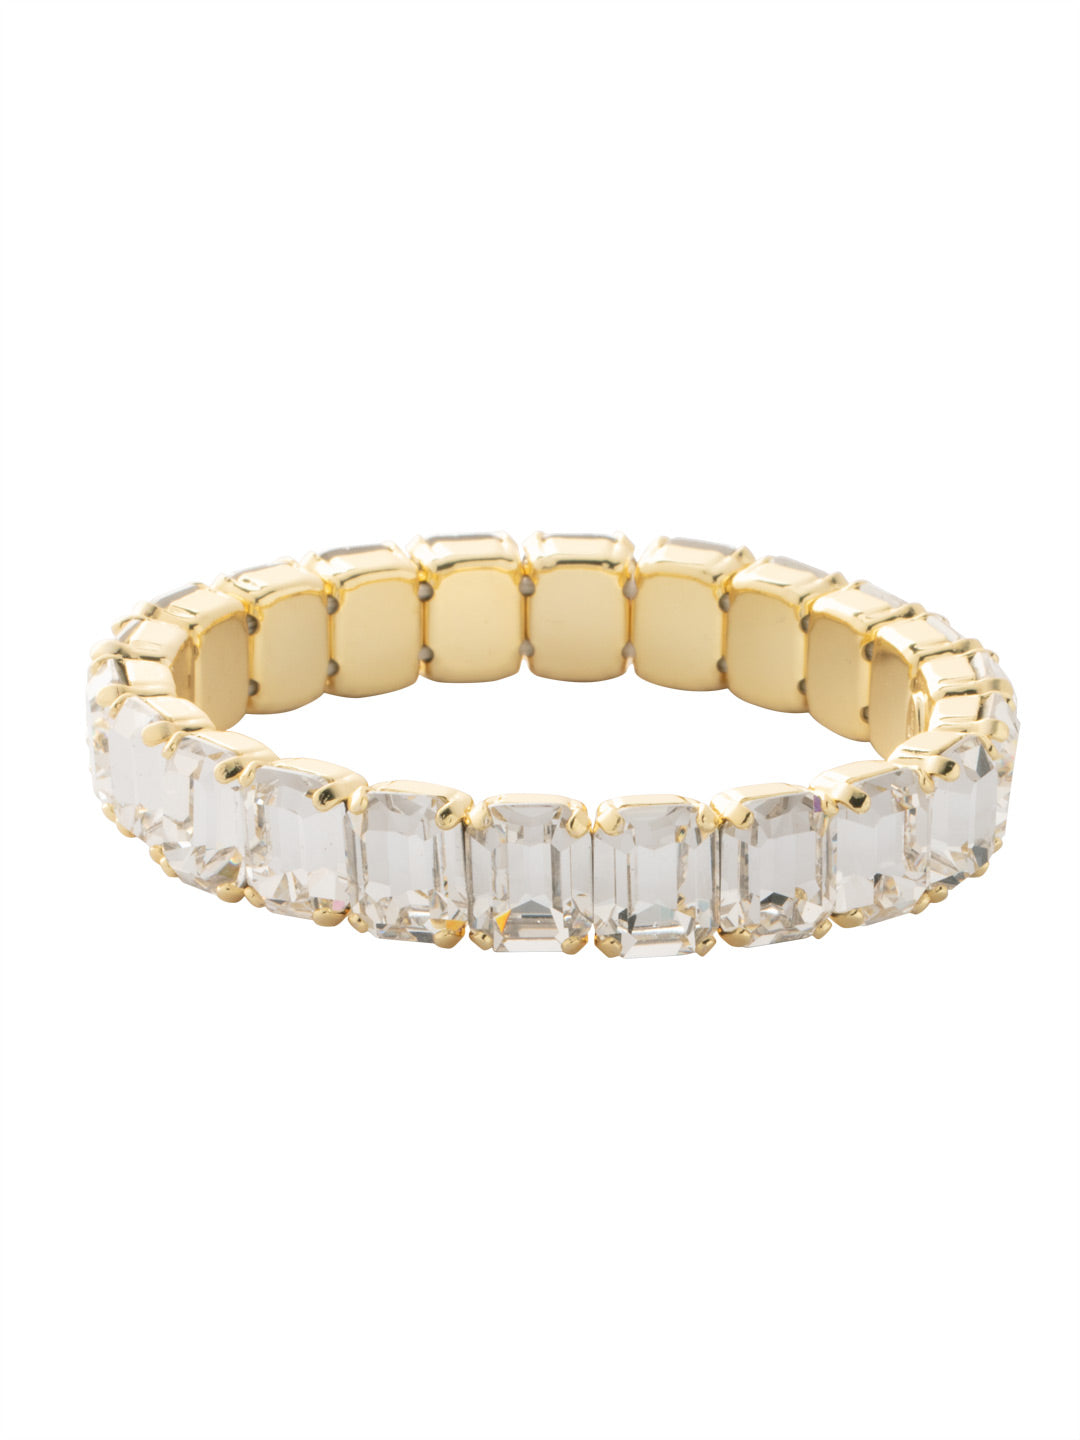 7 inch Octavia Stretch Bracelet - BFM30BGCRY - <p>The 7 inch Octavia Stretch Bracelet features a line of emerald cut crystals on a sturdy jewelers' filament, stretching to fit most wrists comfortably, without the hassle of a clasp! (7 inches, fits average wrist sizes) From Sorrelli's Crystal collection in our Bright Gold-tone finish.</p>